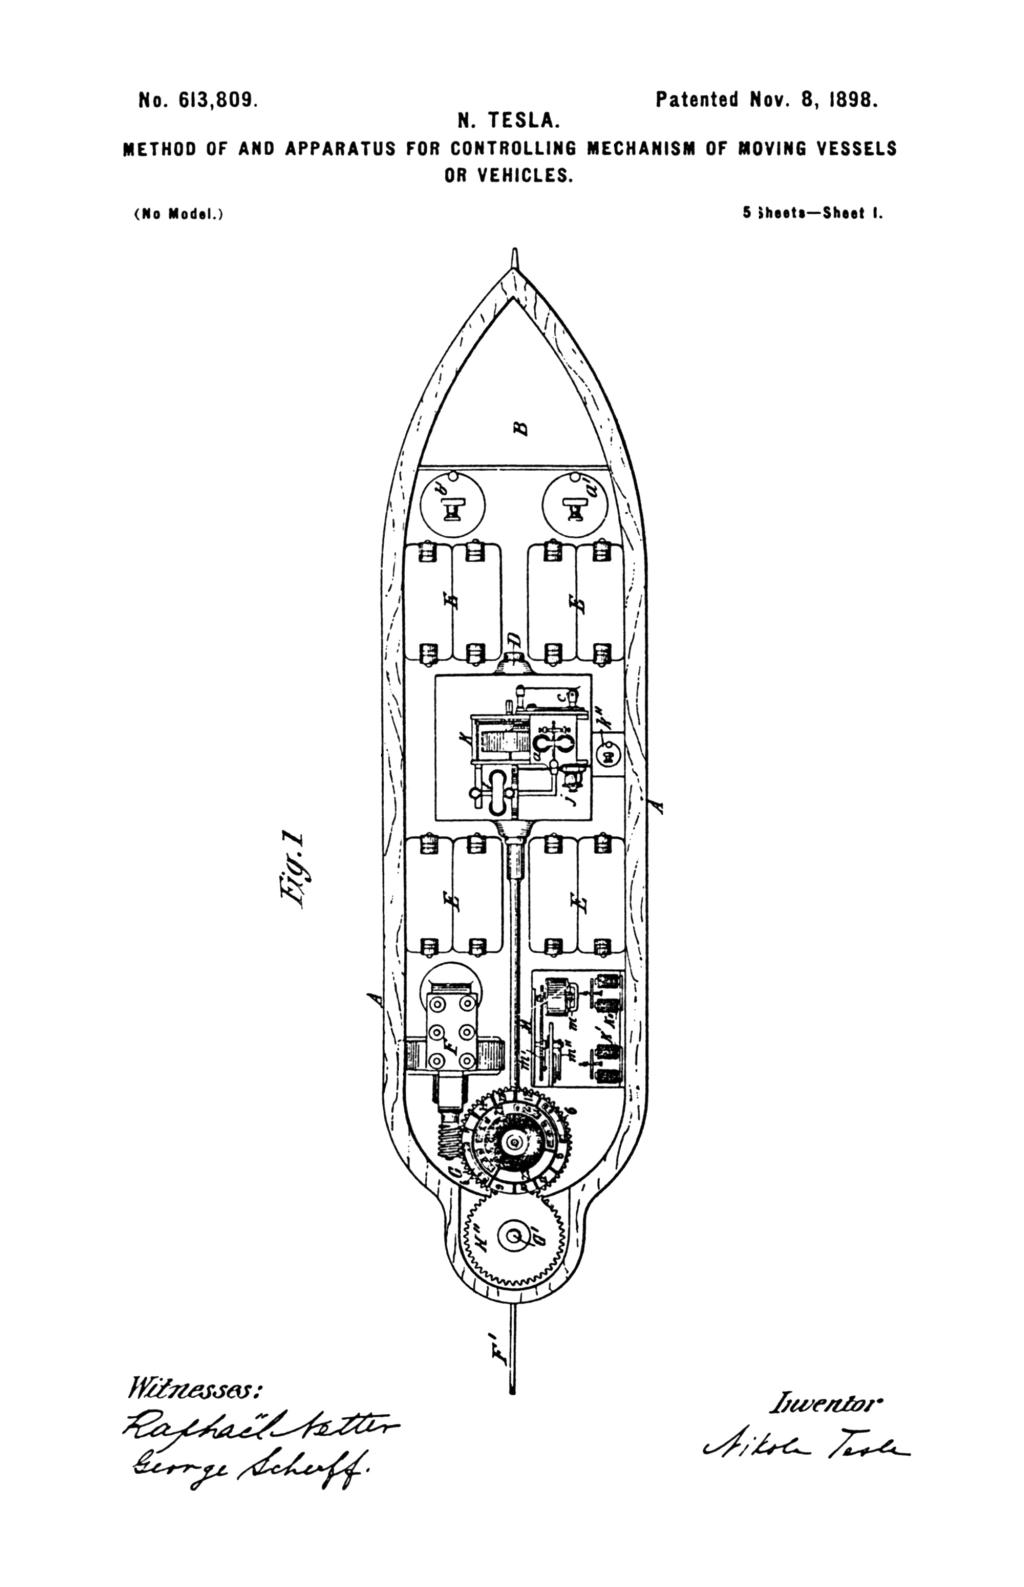 Nikola Tesla U.S. Patent 613,809 - Method of and Apparatus for Controlling Mechanism of Moving Vehicle or Vehicles - Image 1